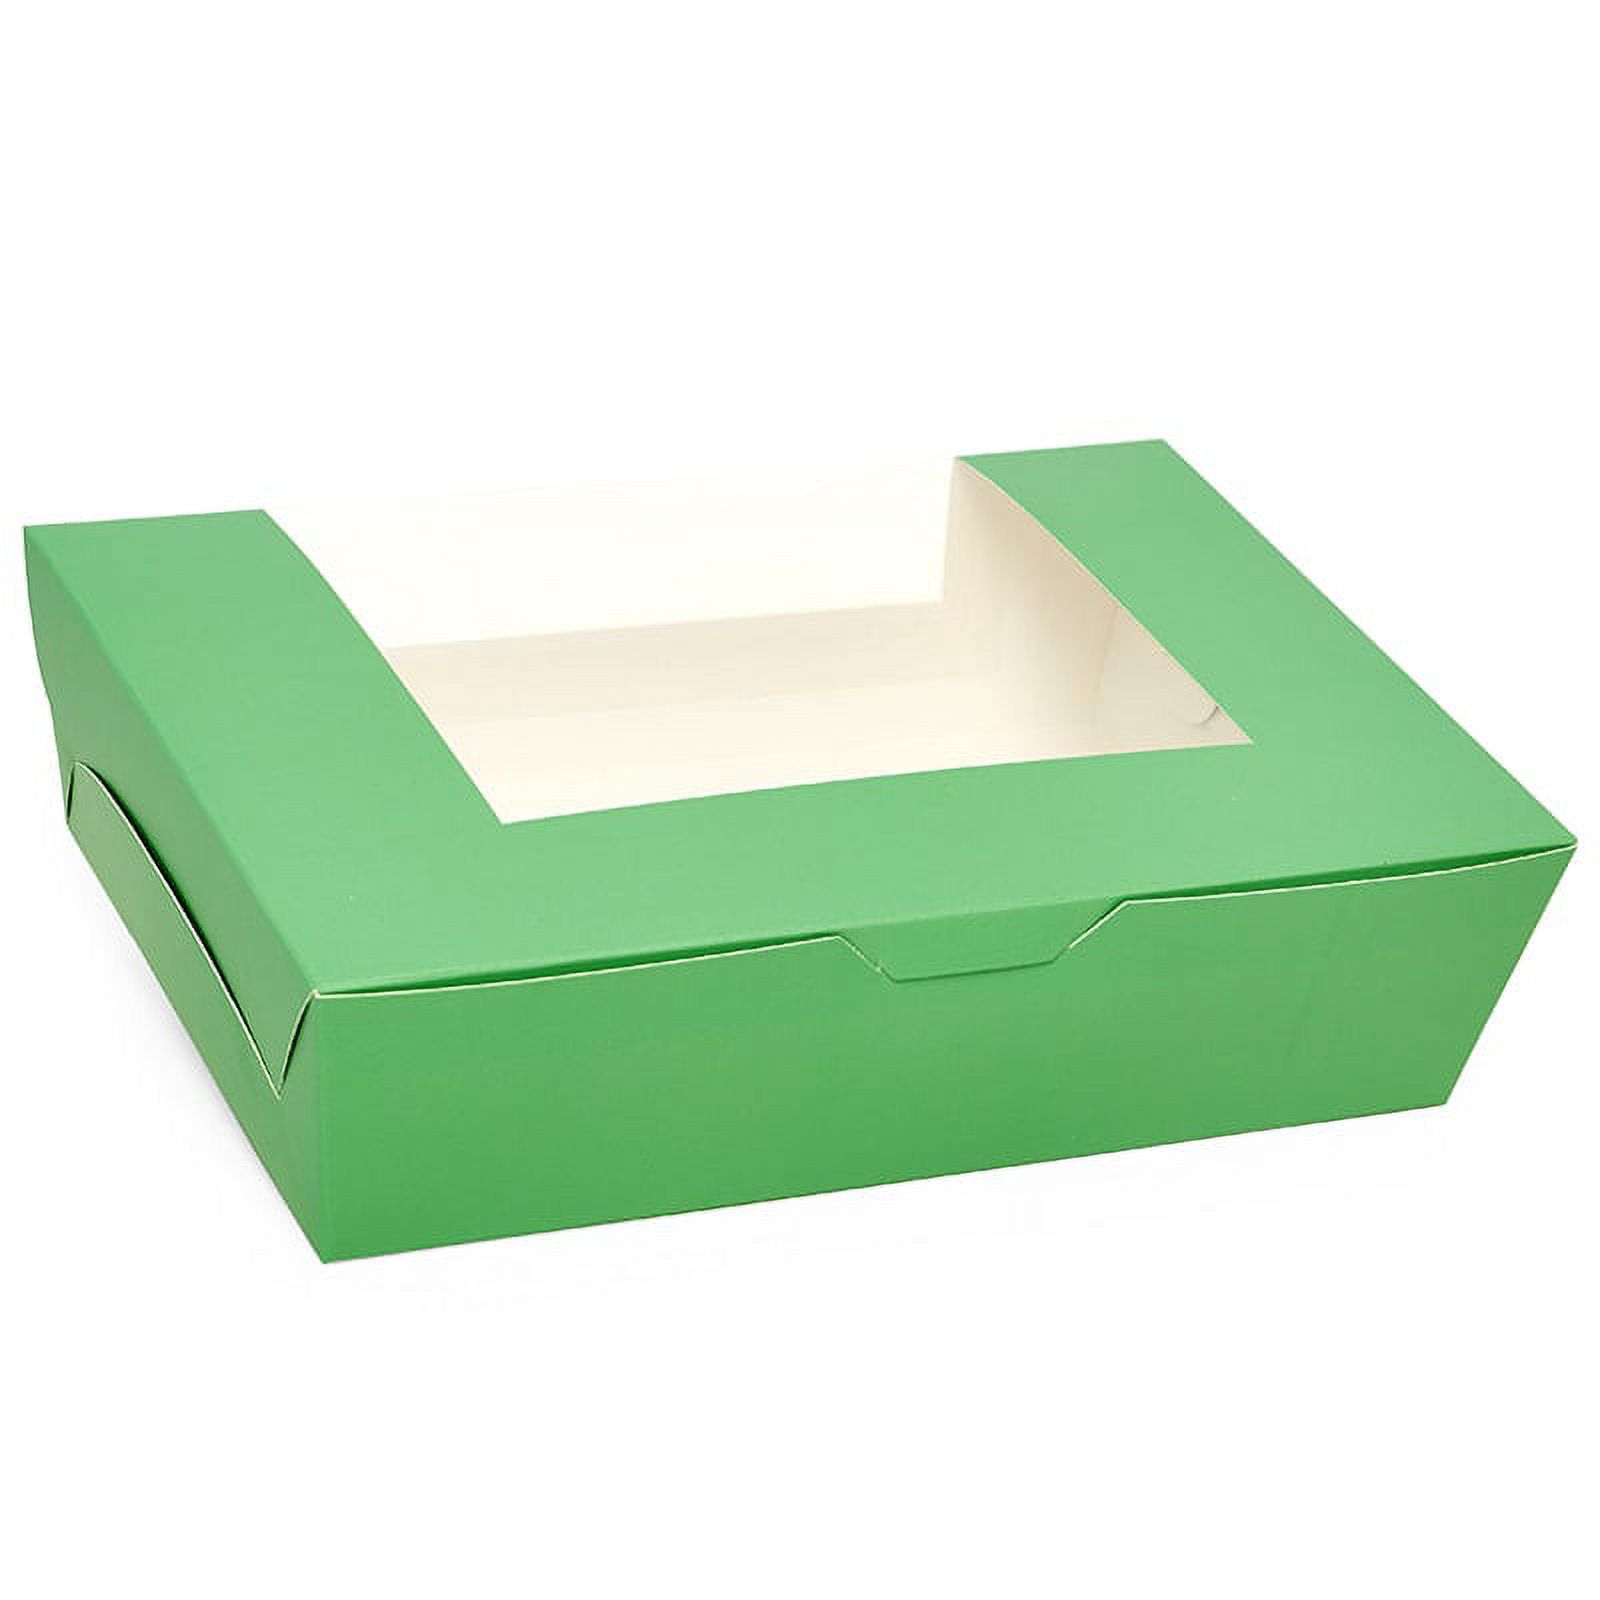 Green Window Bakery Boxes 6-1/2" X 6 1/2" X 2 1/2" | Quantity: 100 by Paper Mart - image 1 of 1